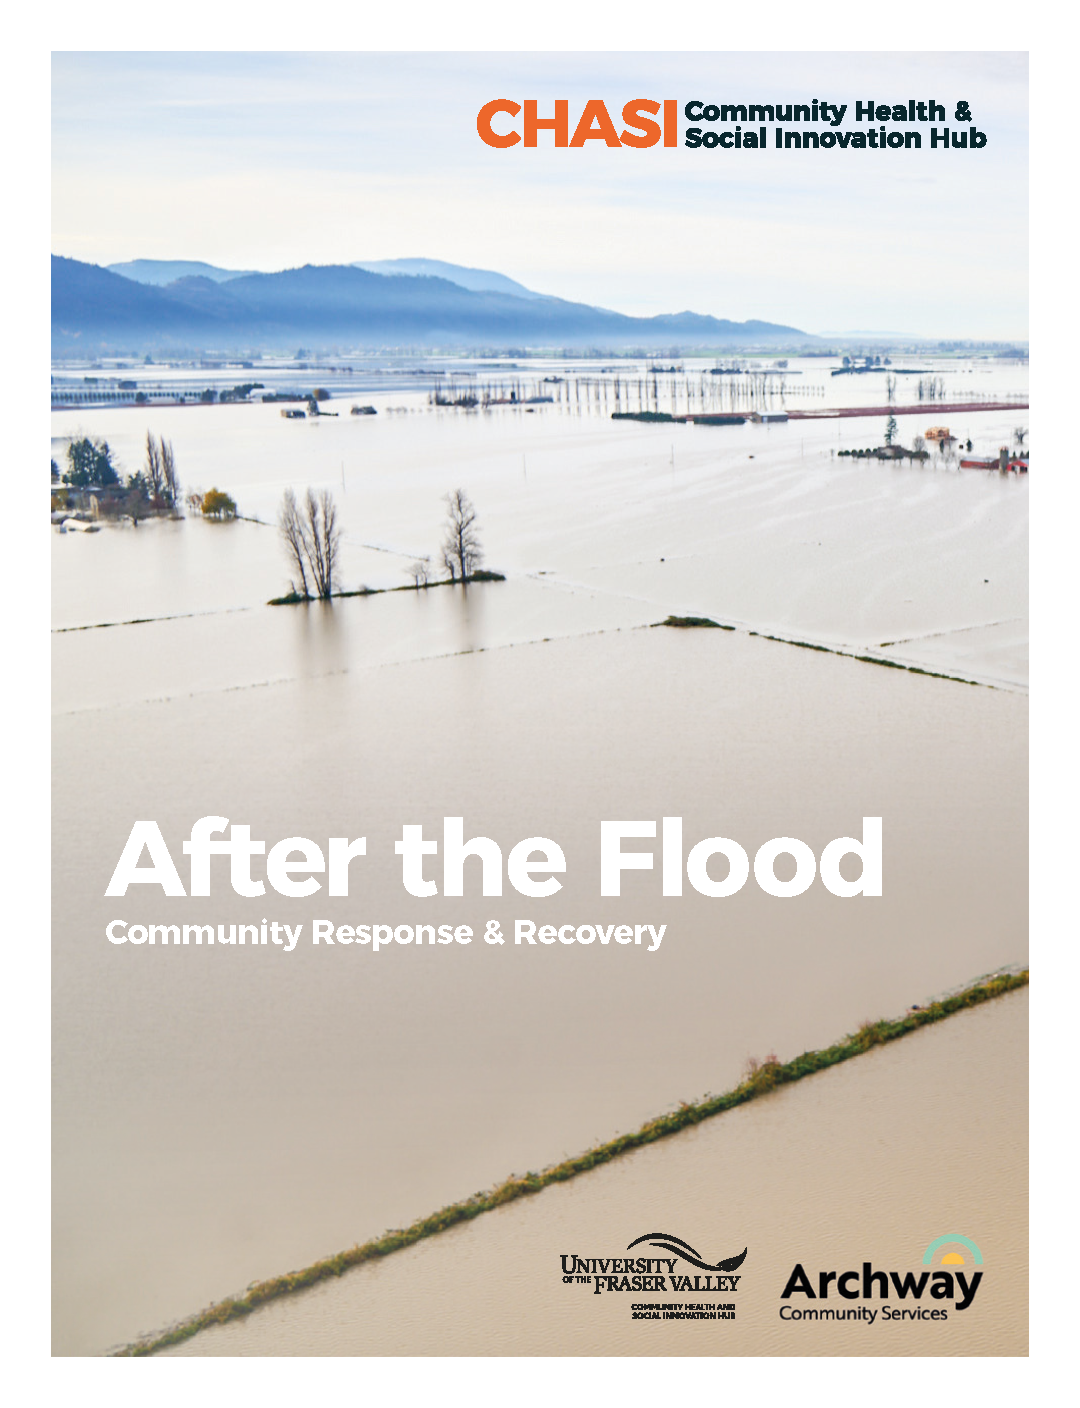 Cover for the report "After the Flood: Community Response and Recovery" which shows an aerial photo of brownish floodwaters covering land in Abbotsford, with a mountain in the distance.